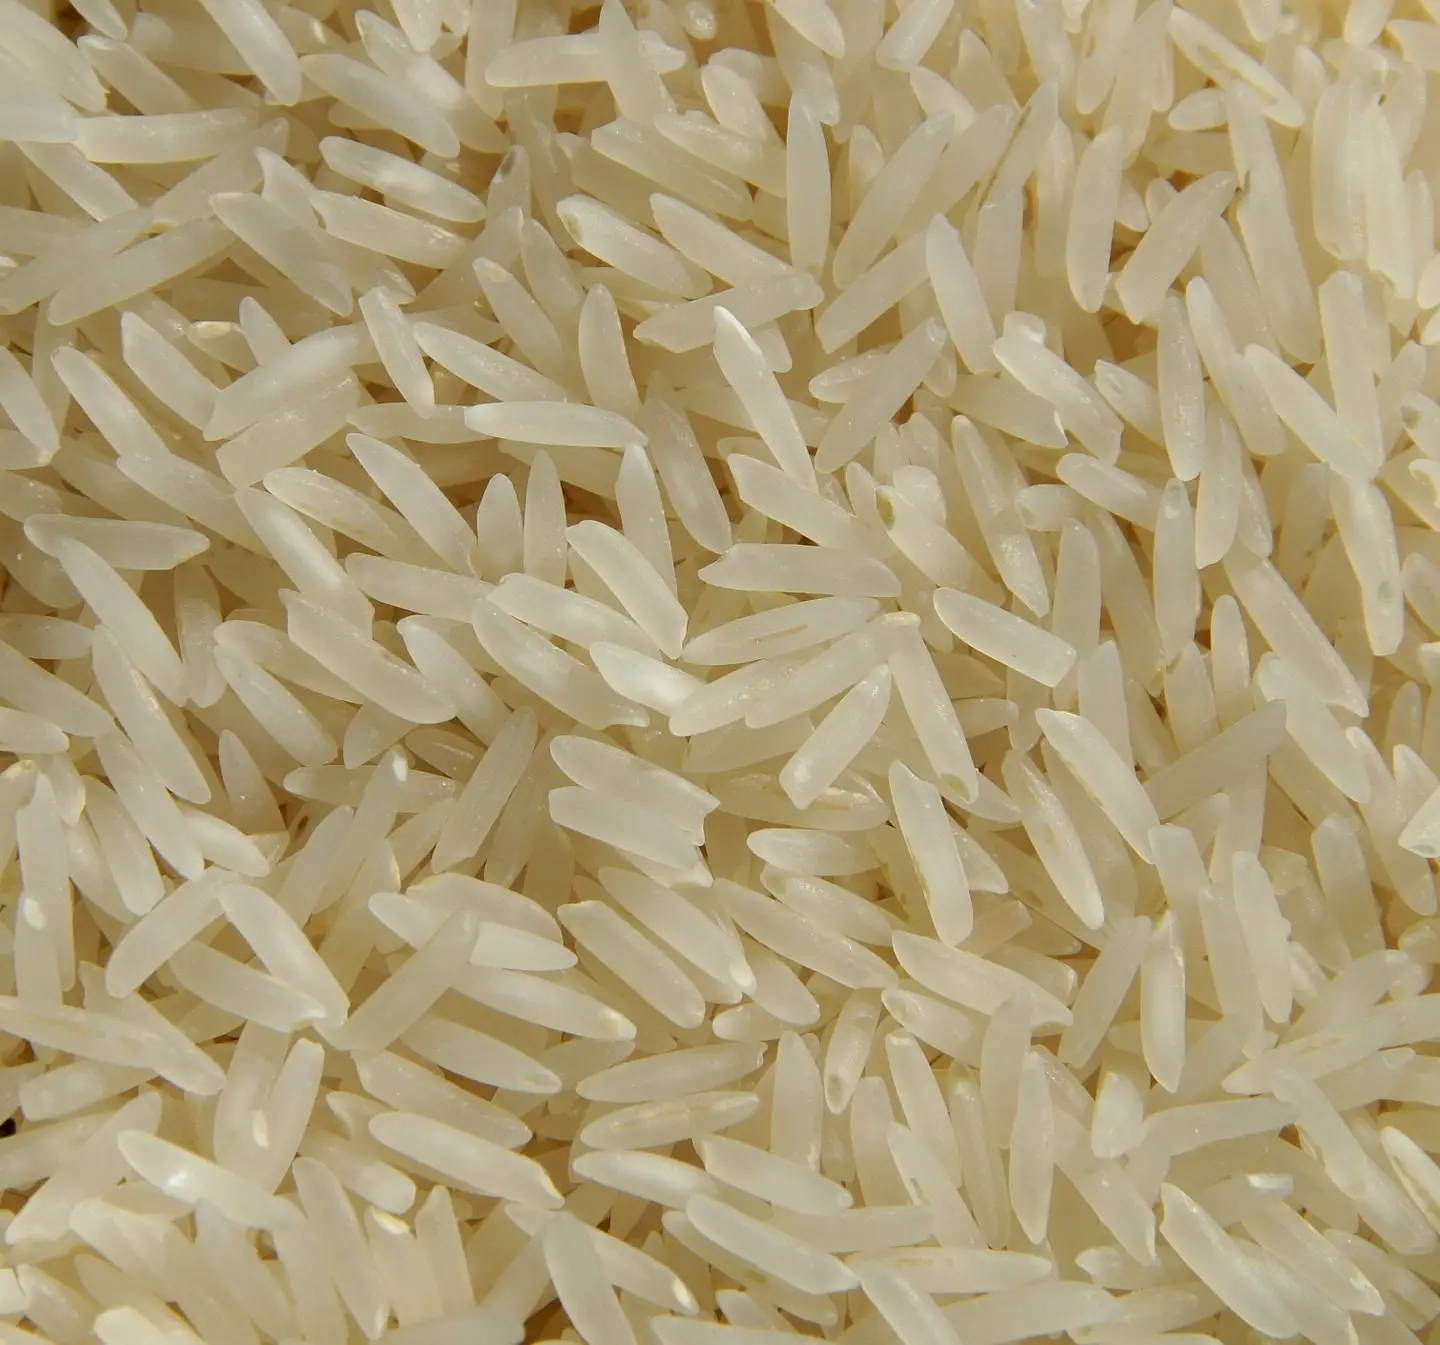 How to Cook Rice – A Beginner’s Guide